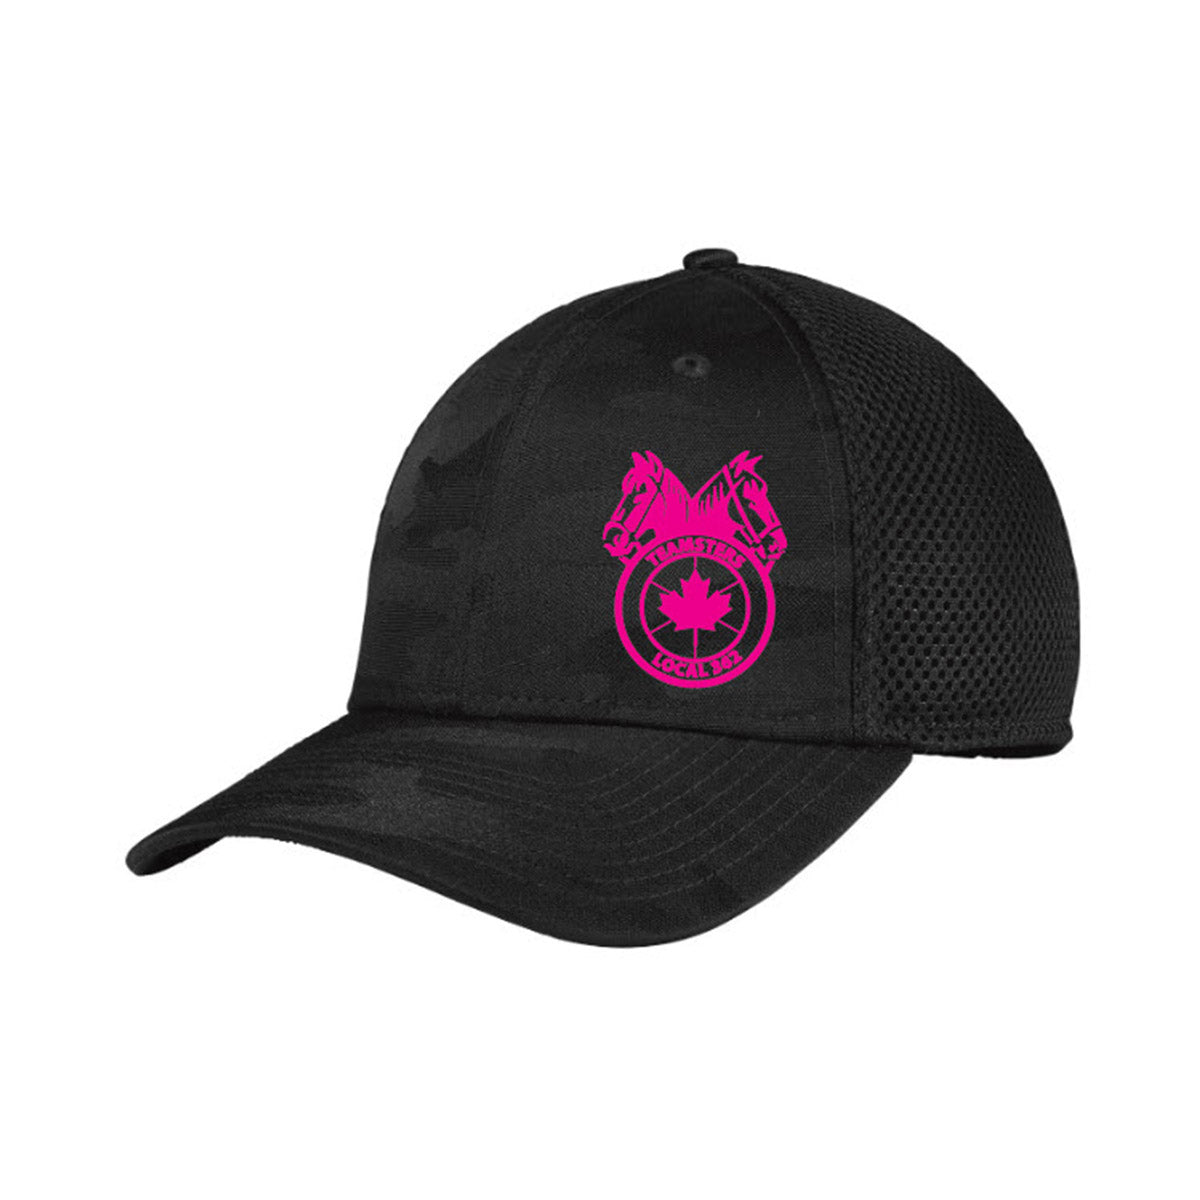 Teamsters 362 - Tonal Camo Cap - NEON PINK Embroidery